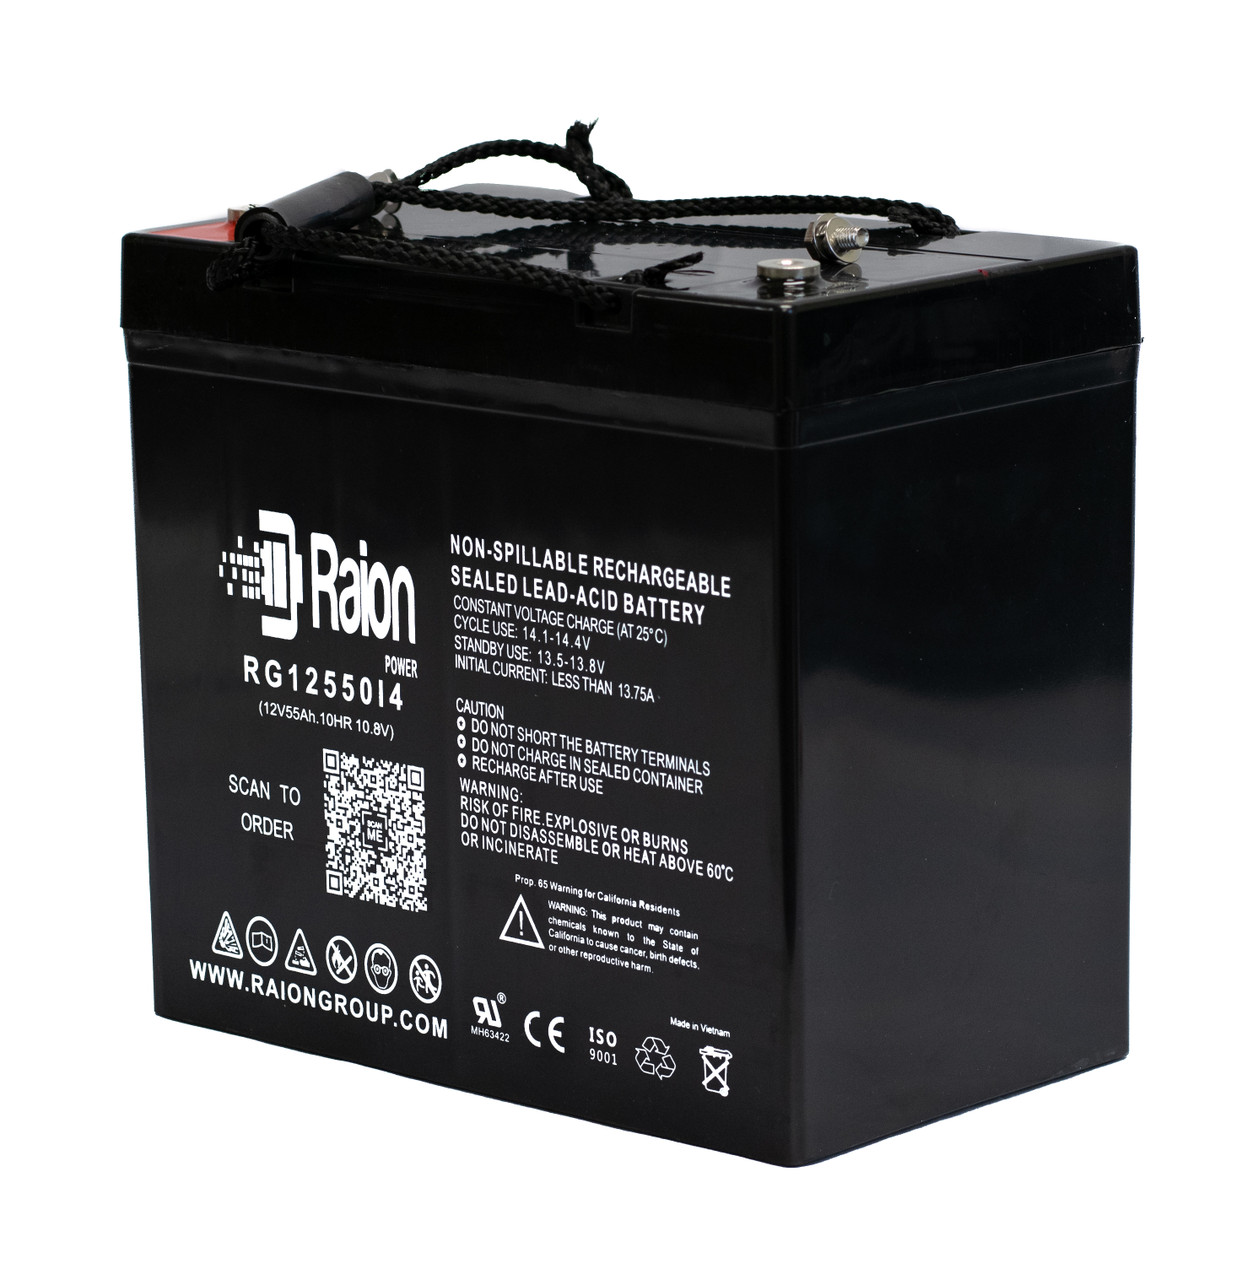 Raion Power 12V 55Ah 22NF Mobility Scooter Battery Replacement for Drive Medical Denali